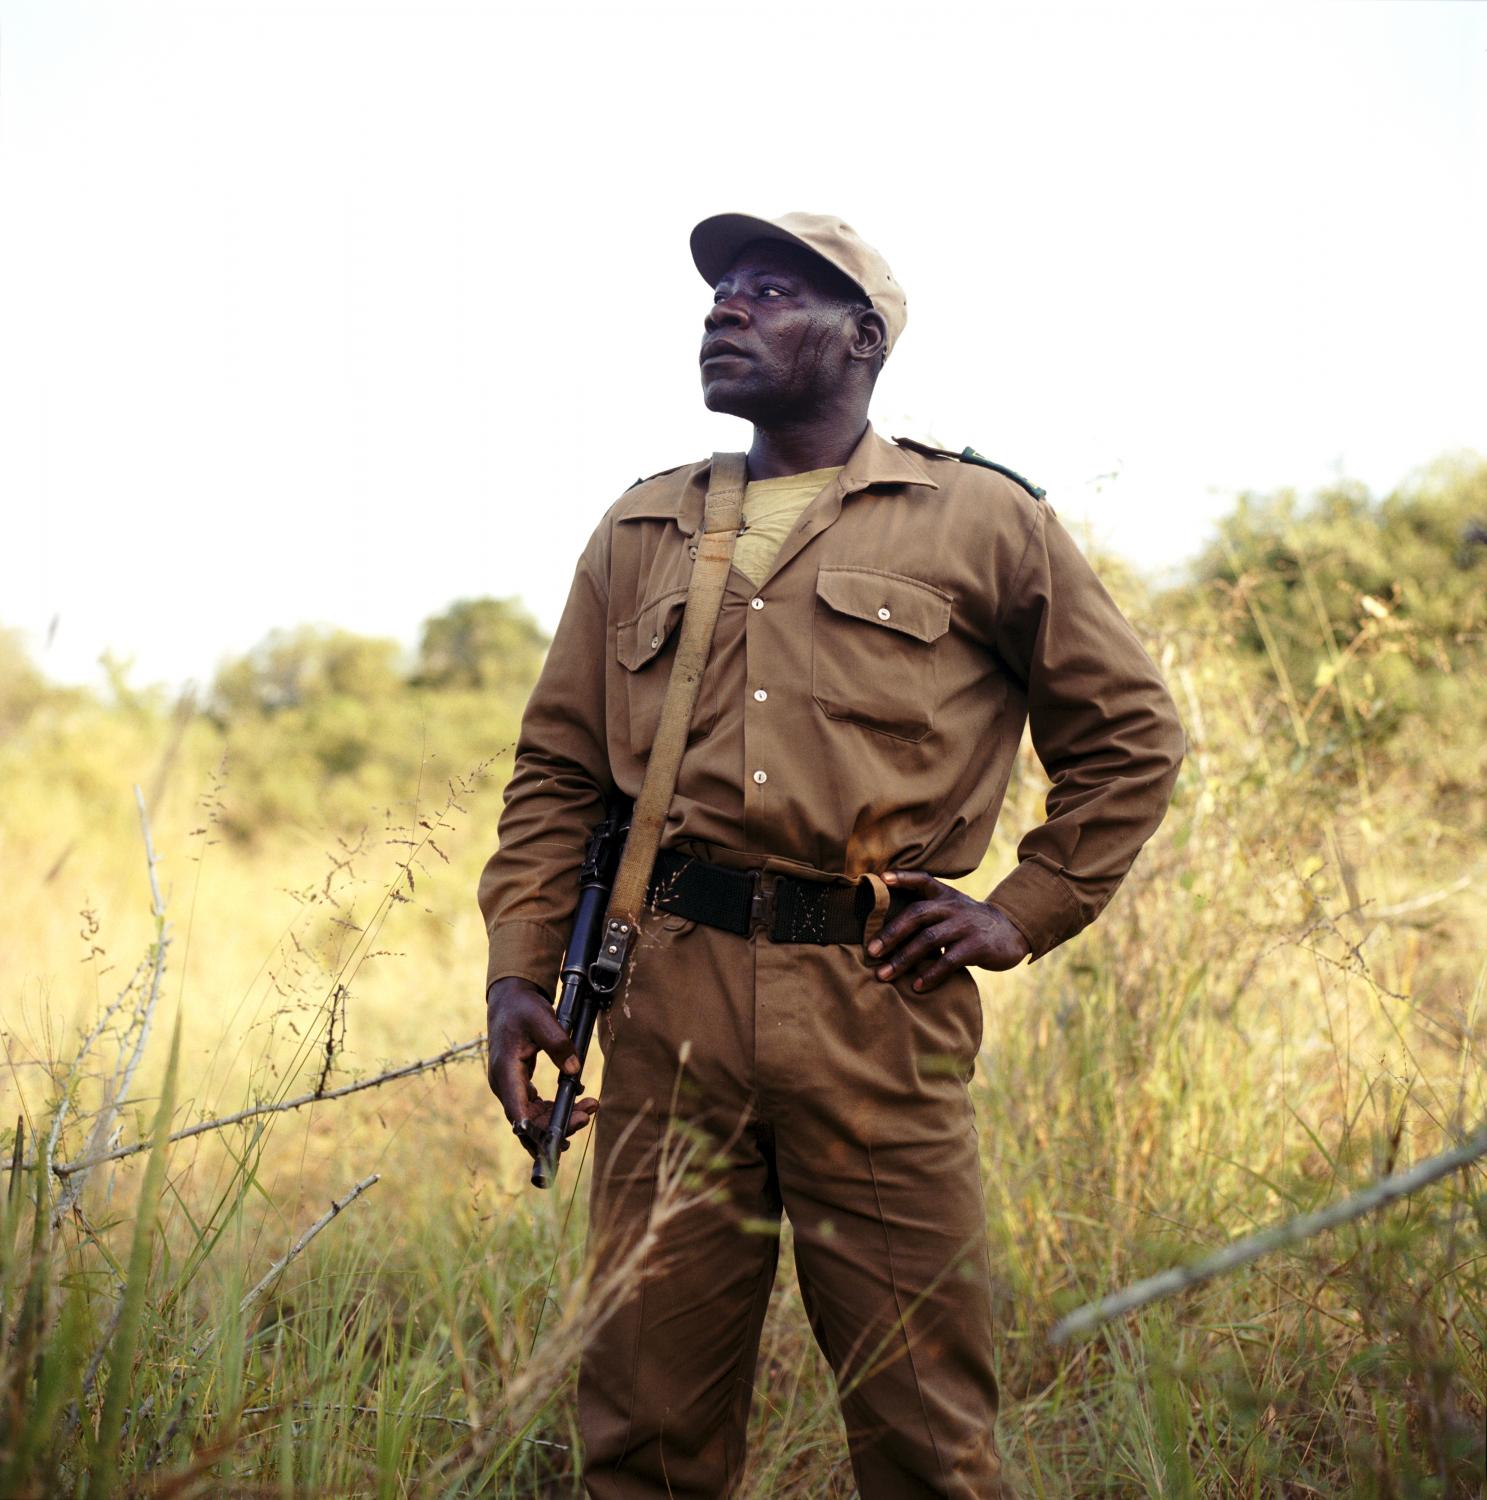 Angola - A park ranger at the Quissama National Park in Angola